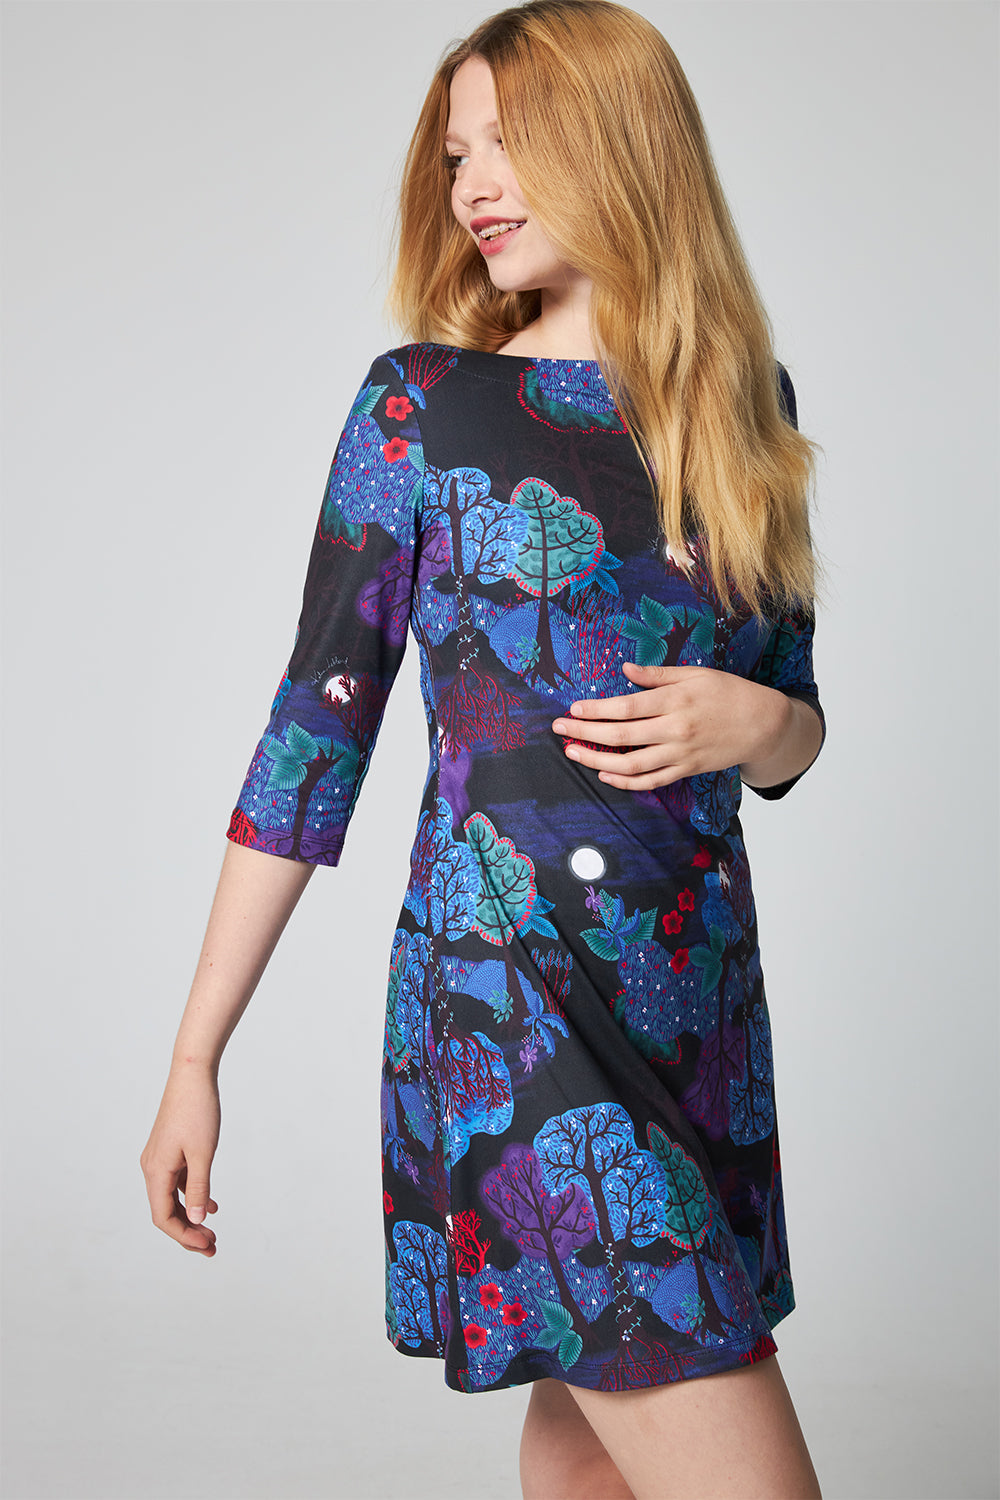 A-Line Dress - Enchanted Forest